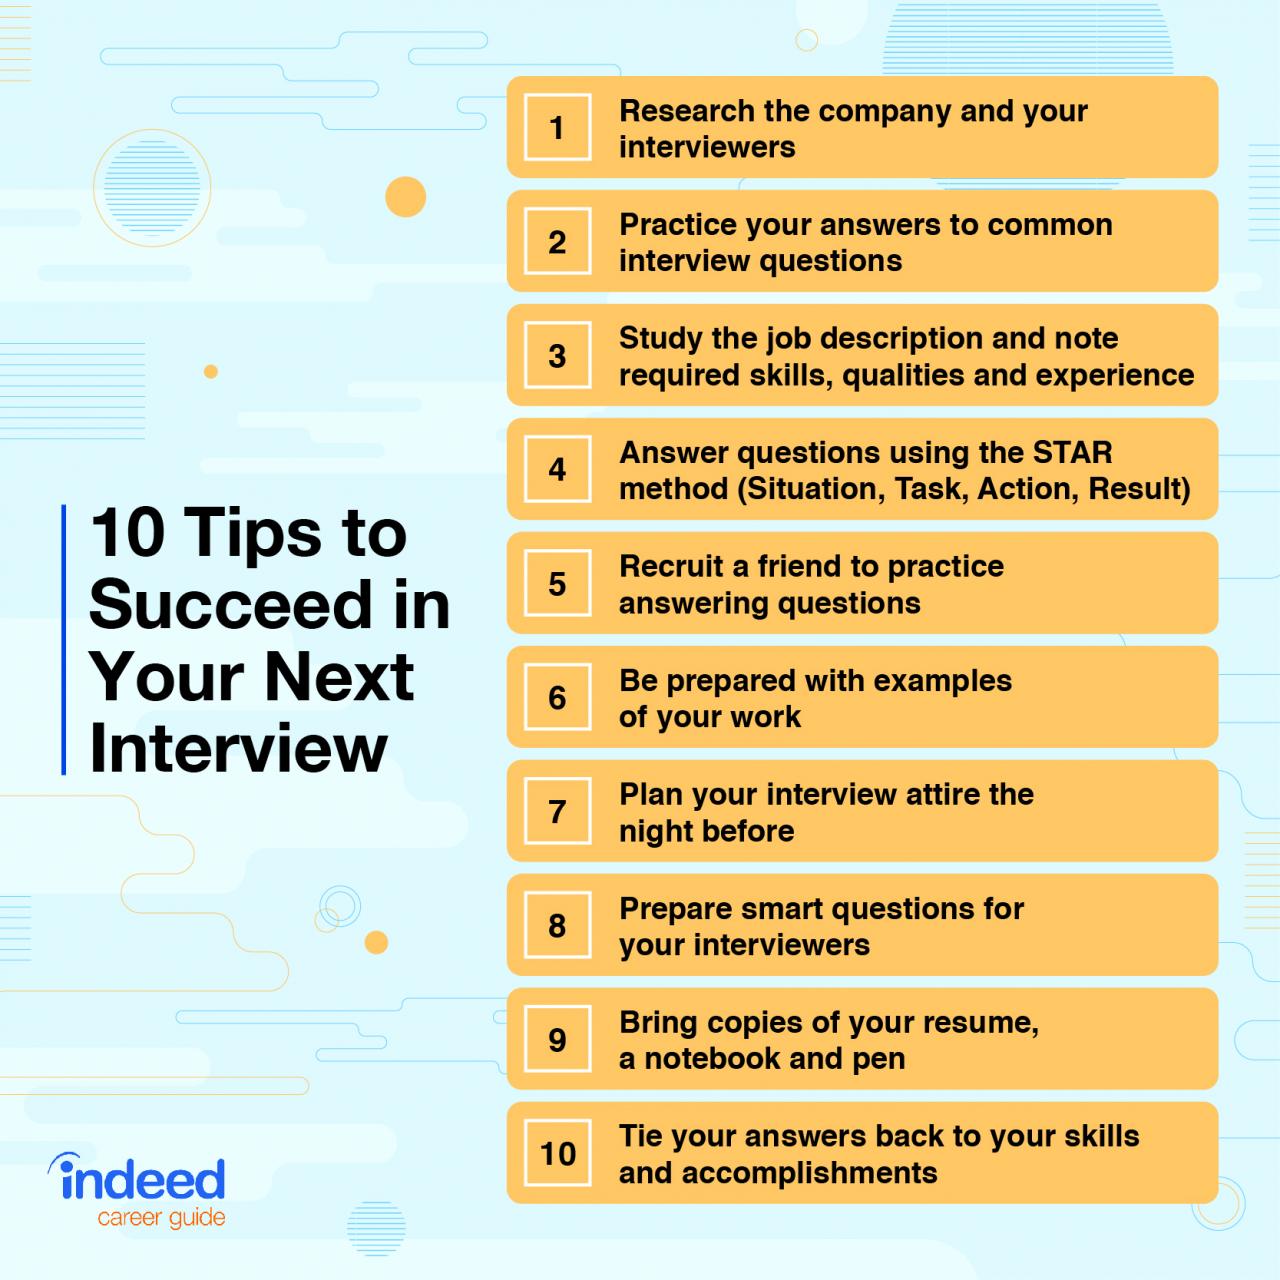 5 questions you should ask at an interview